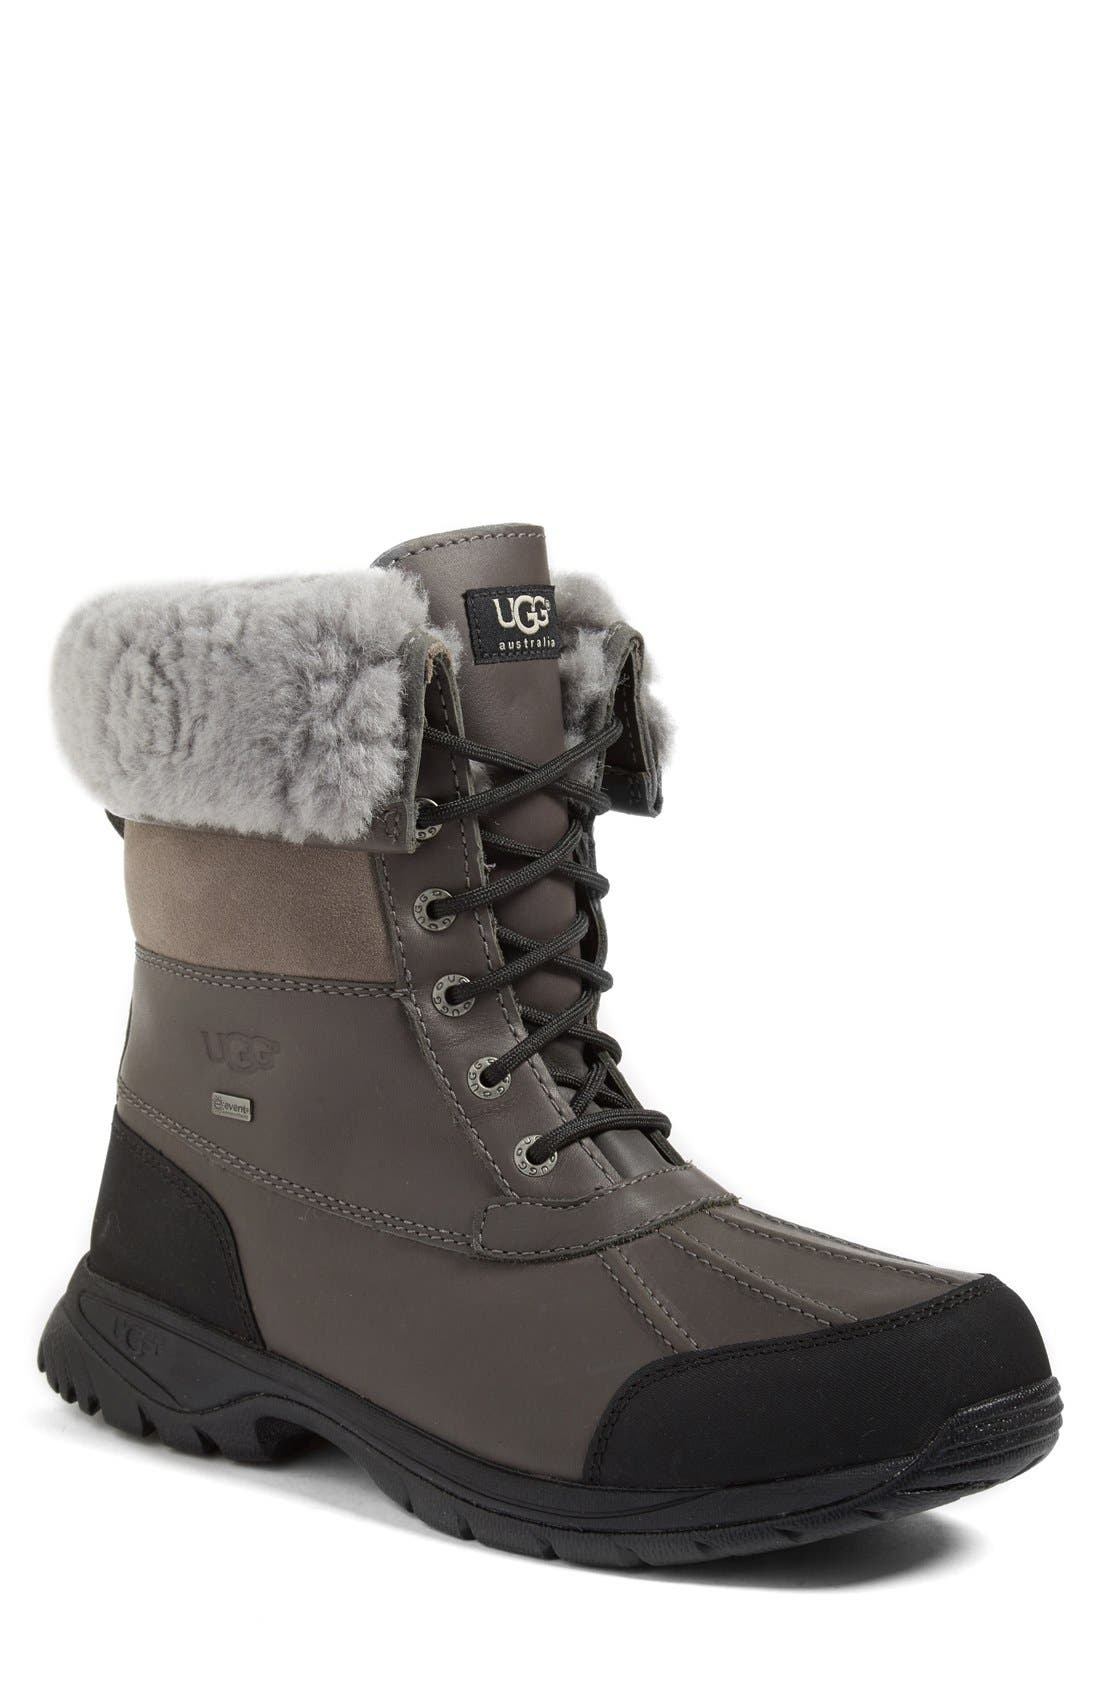 mustang snowboots off white